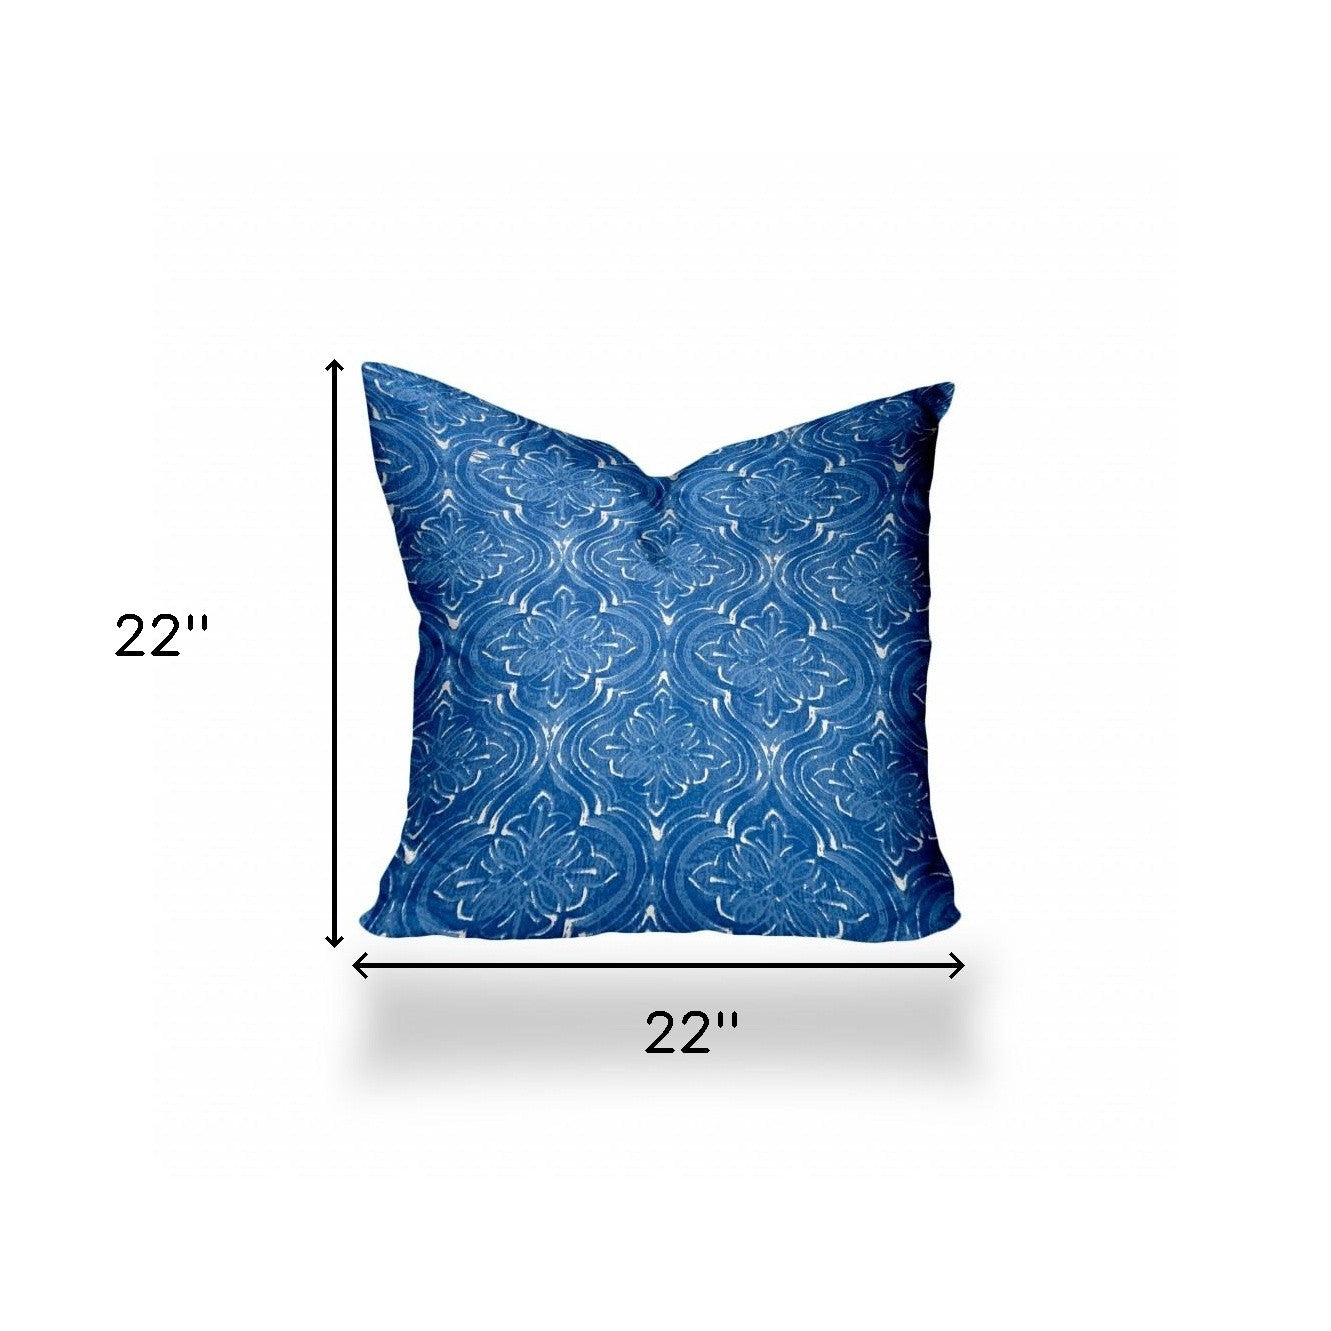 22" X 22" Blue And White Zippered Ikat Throw Indoor Outdoor Pillow